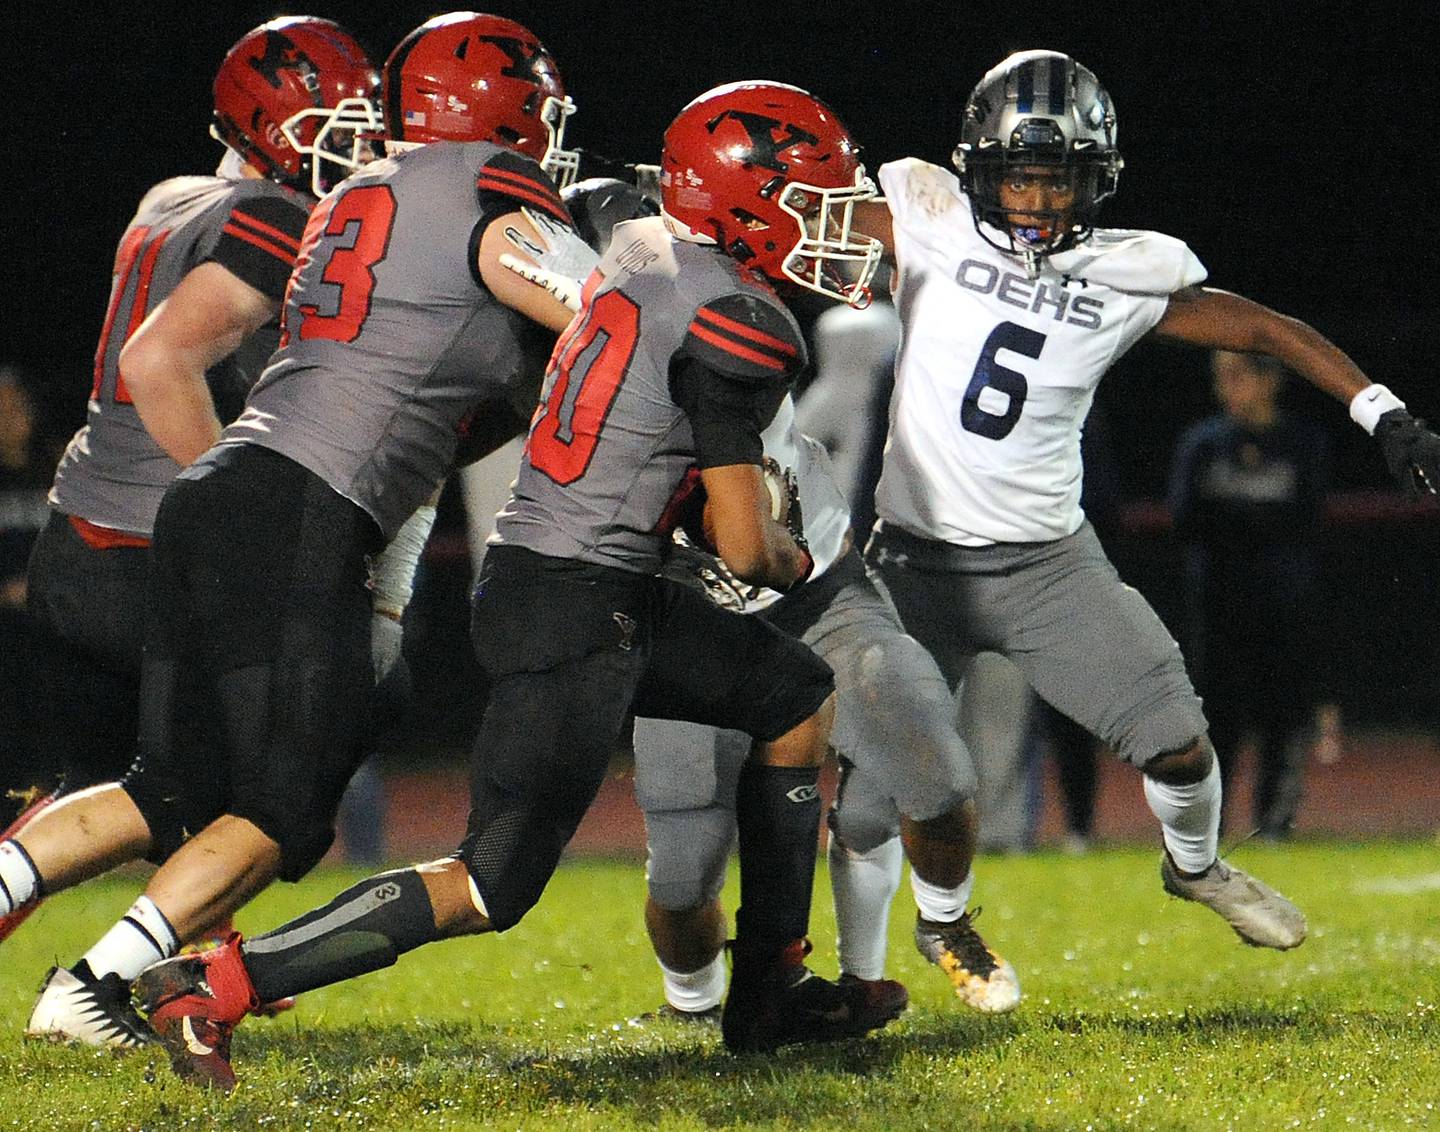 Yorkville running back Deajeion Lewis (20) runs past Oswego East defensive back Jabari Peoples (6) during a varsity football game at Yorkville High School on Friday.